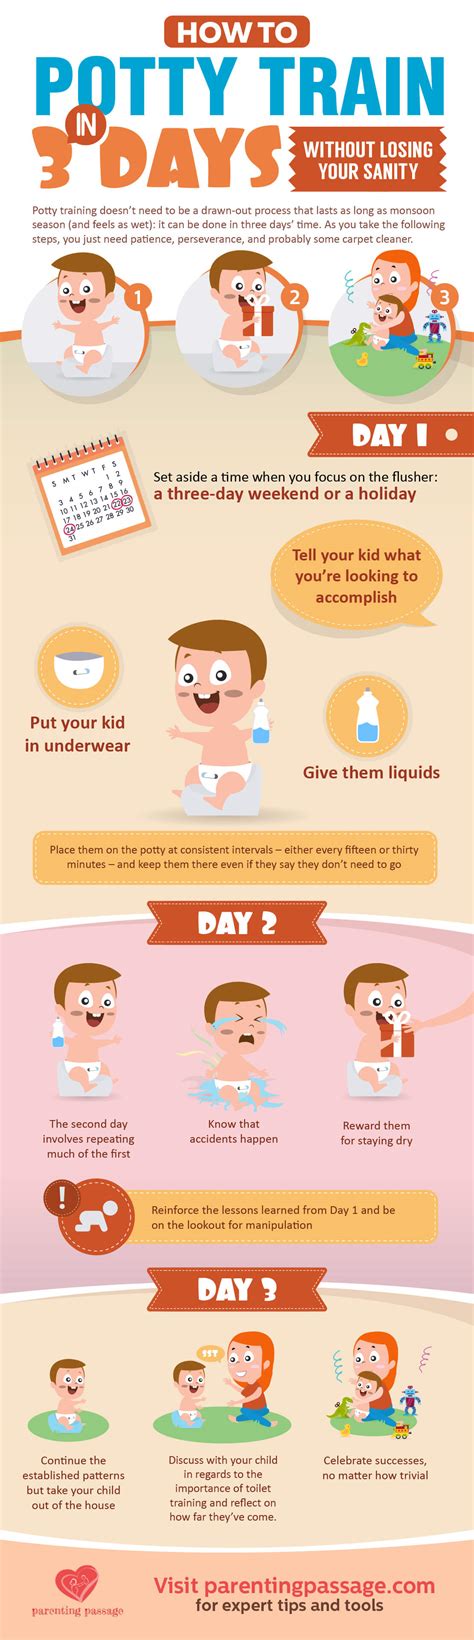 How To Potty Train Your Child In Just 3 Days Infographic